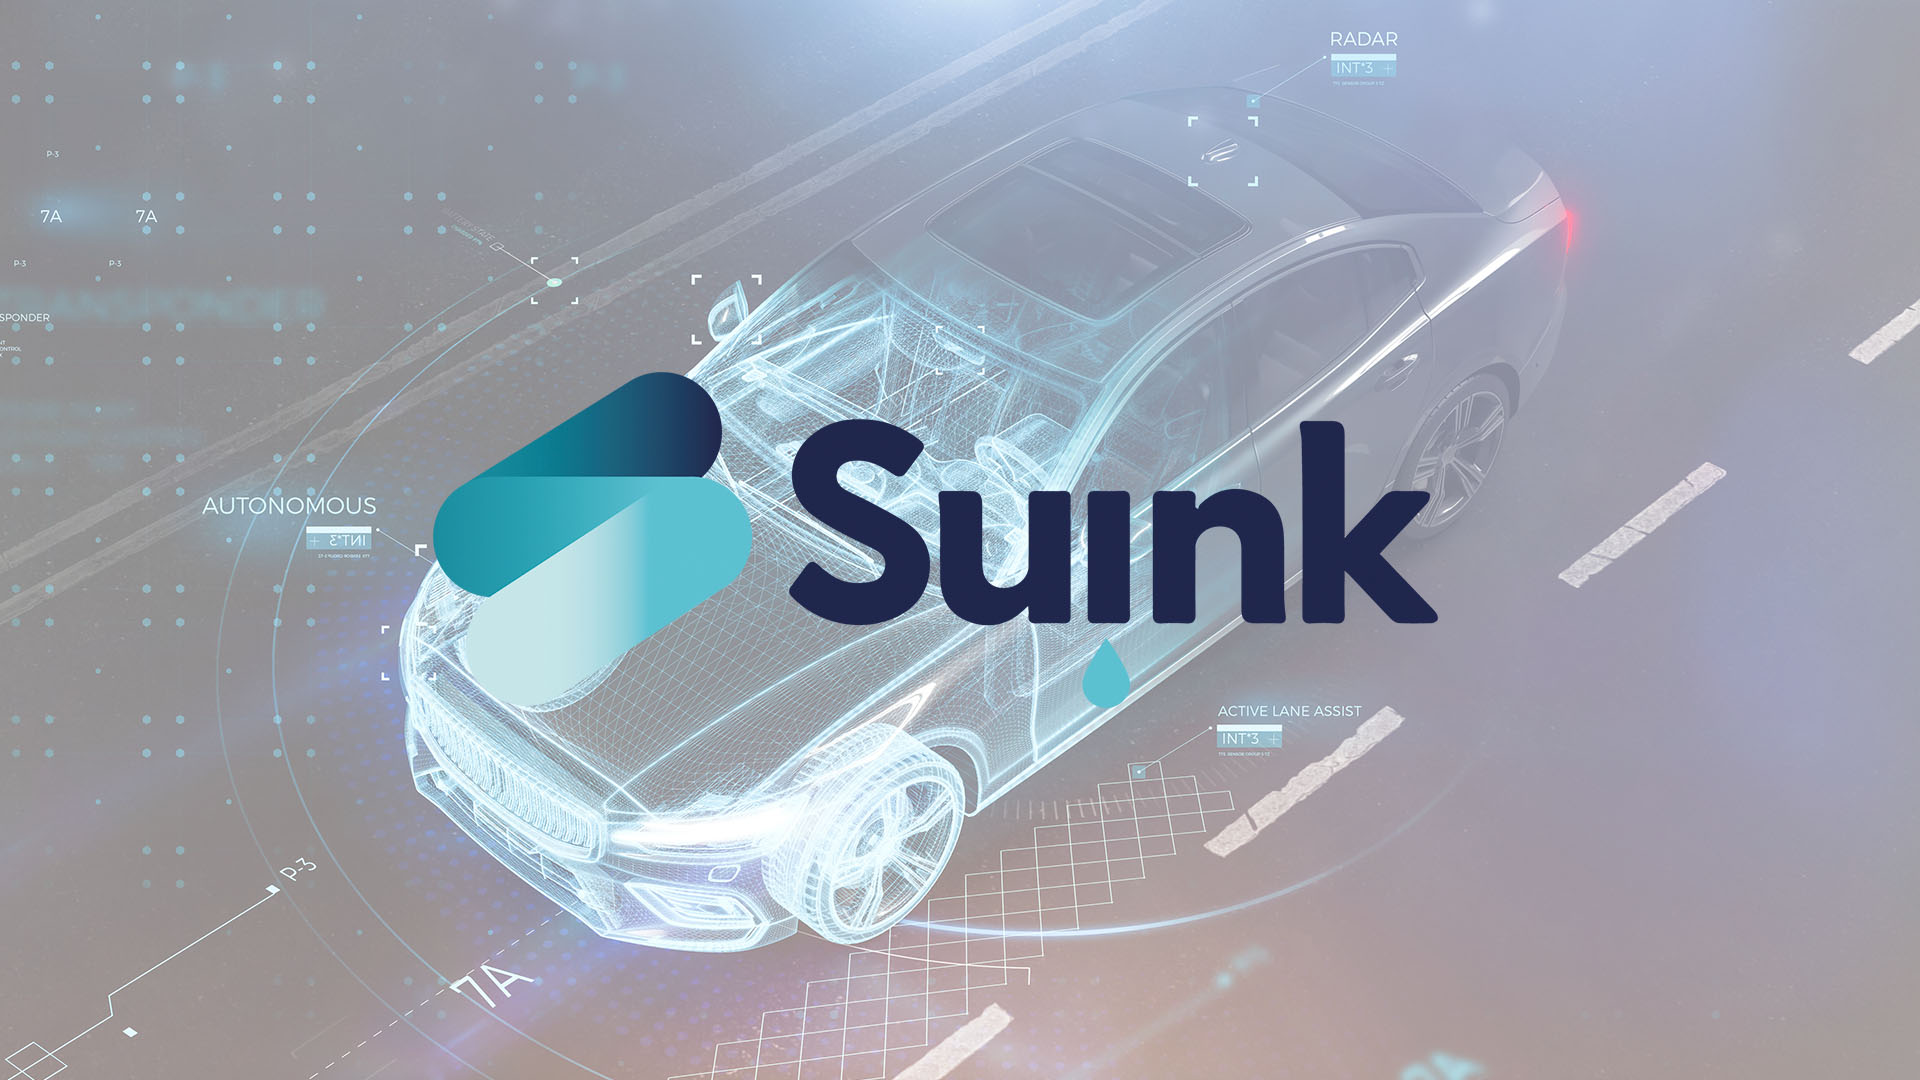 SUINK project